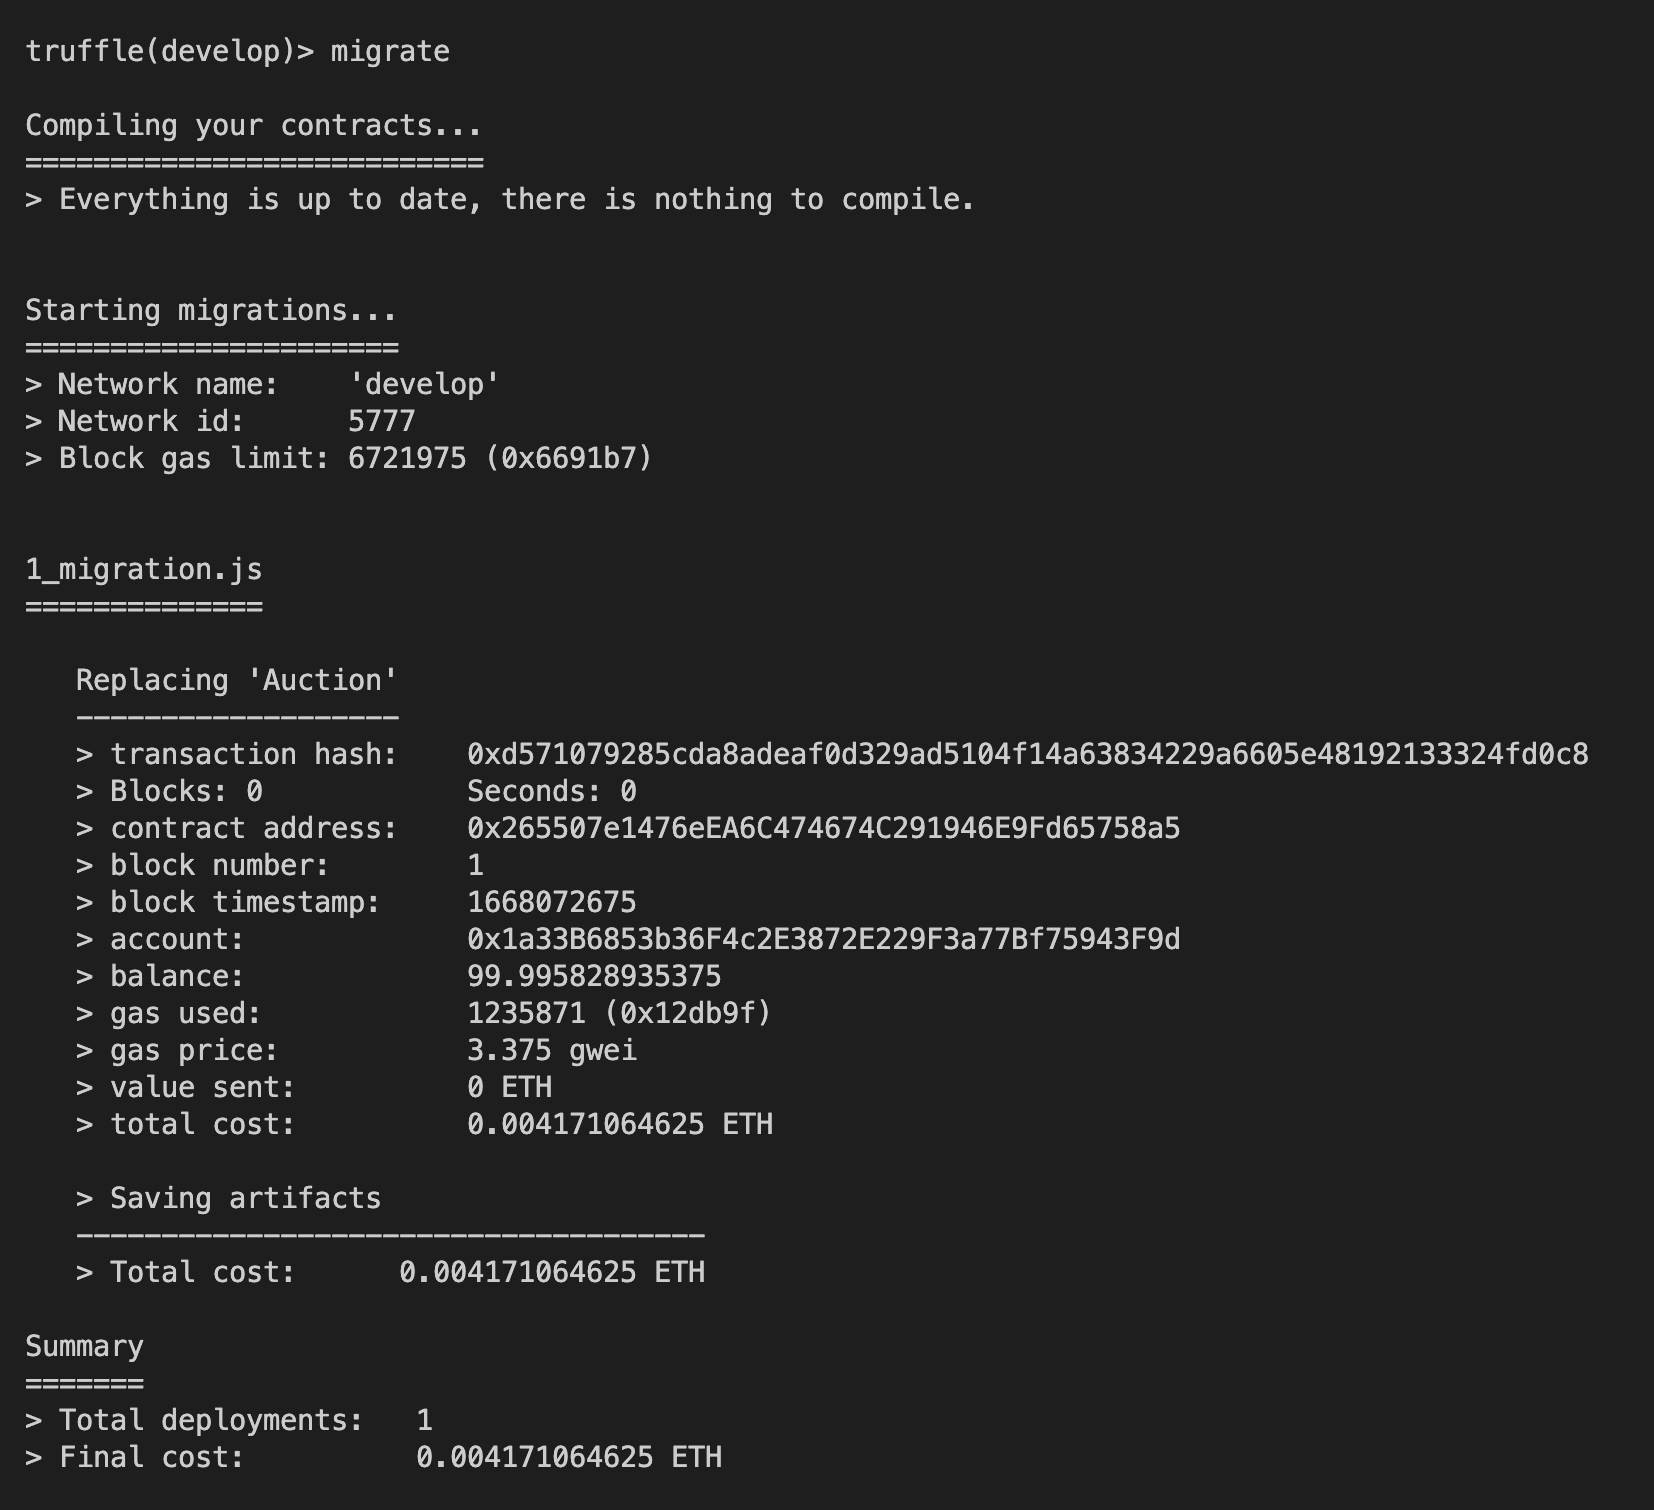 Image of the output from Truffle migrate command